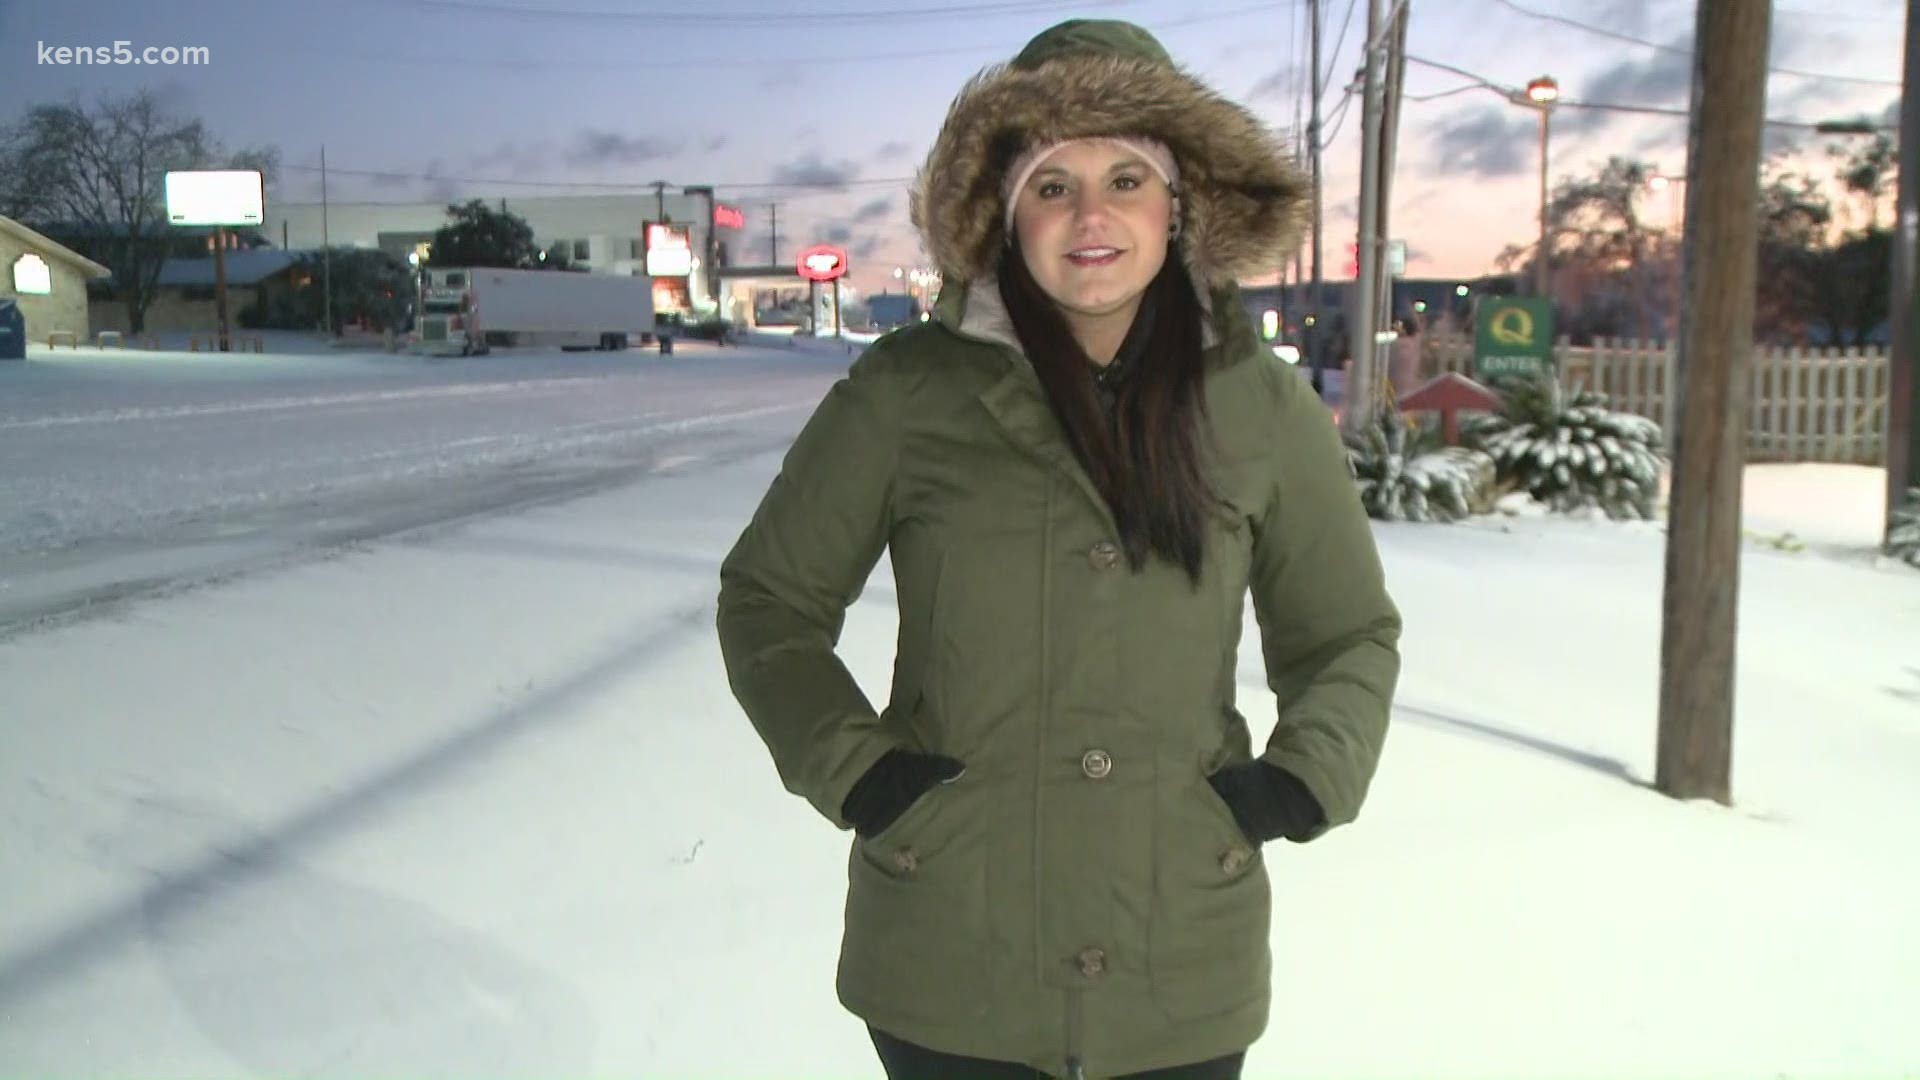 "Don't try to get out on the roads," said a traveling nurse we spoke to in Kerrville.